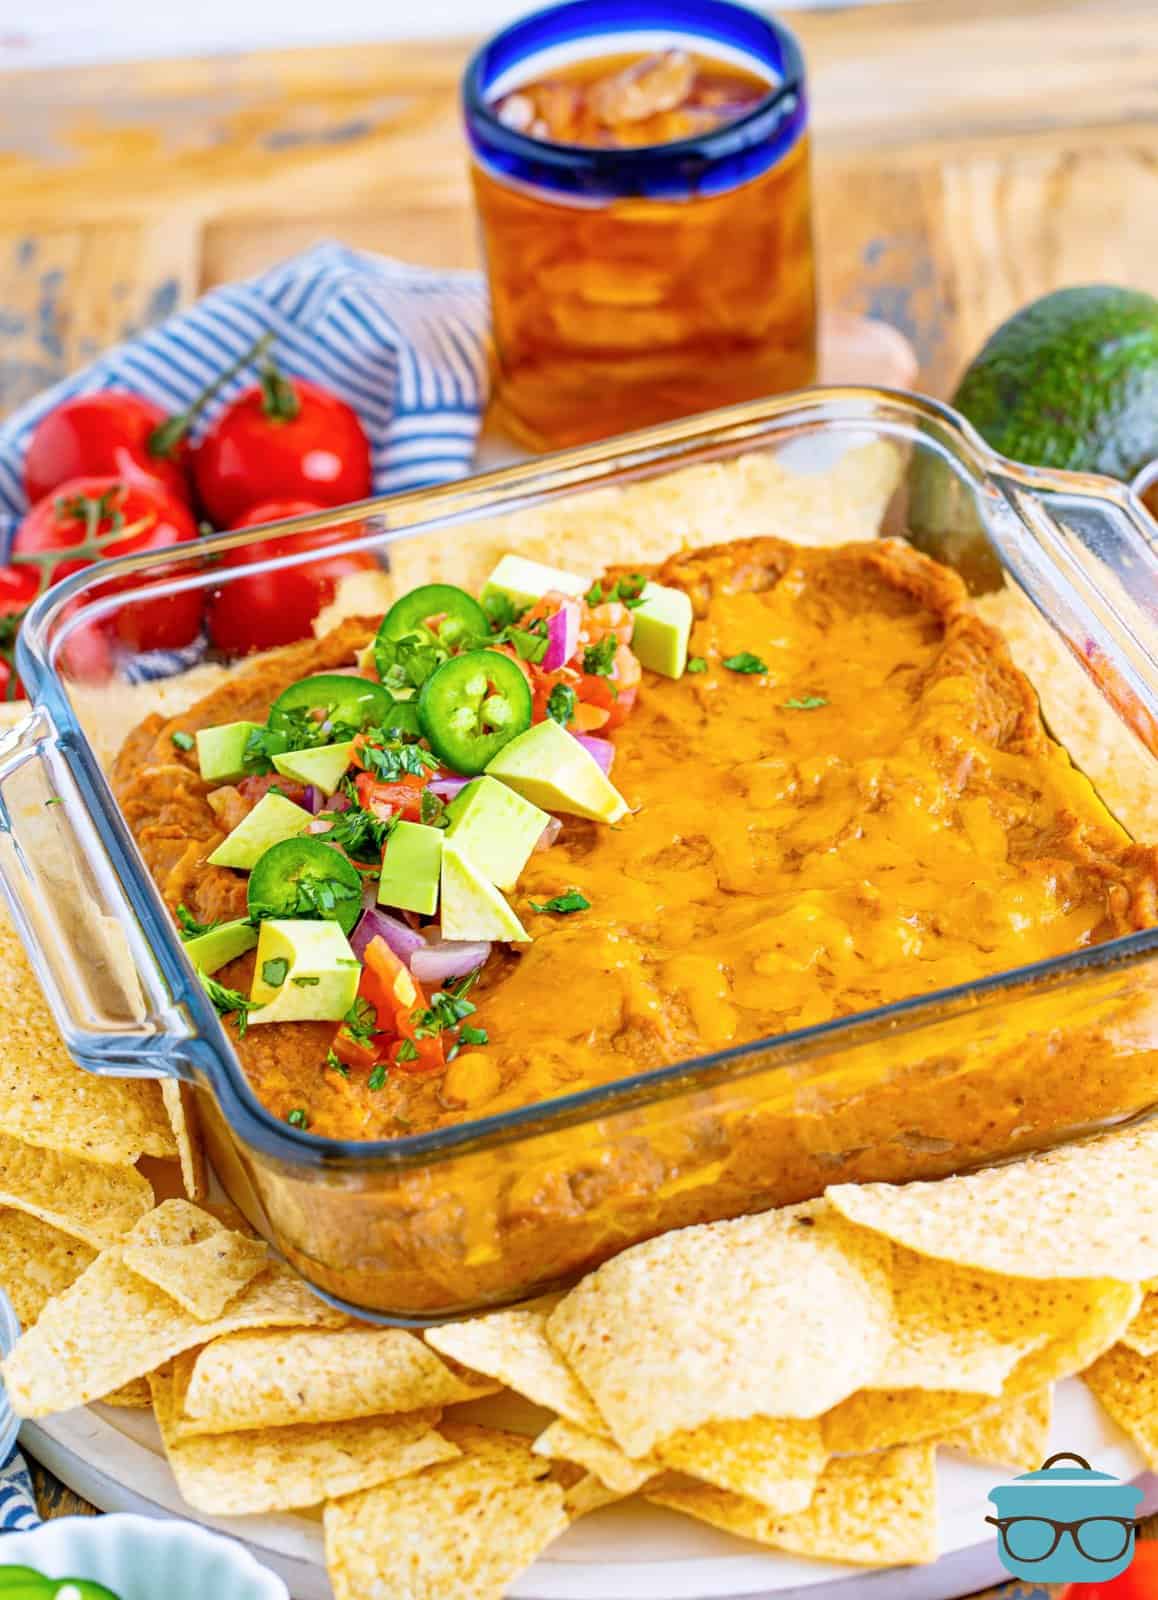 fully baked refried bean dip with toppings shown with tortilla chips and a glass of iced tea in the background. 